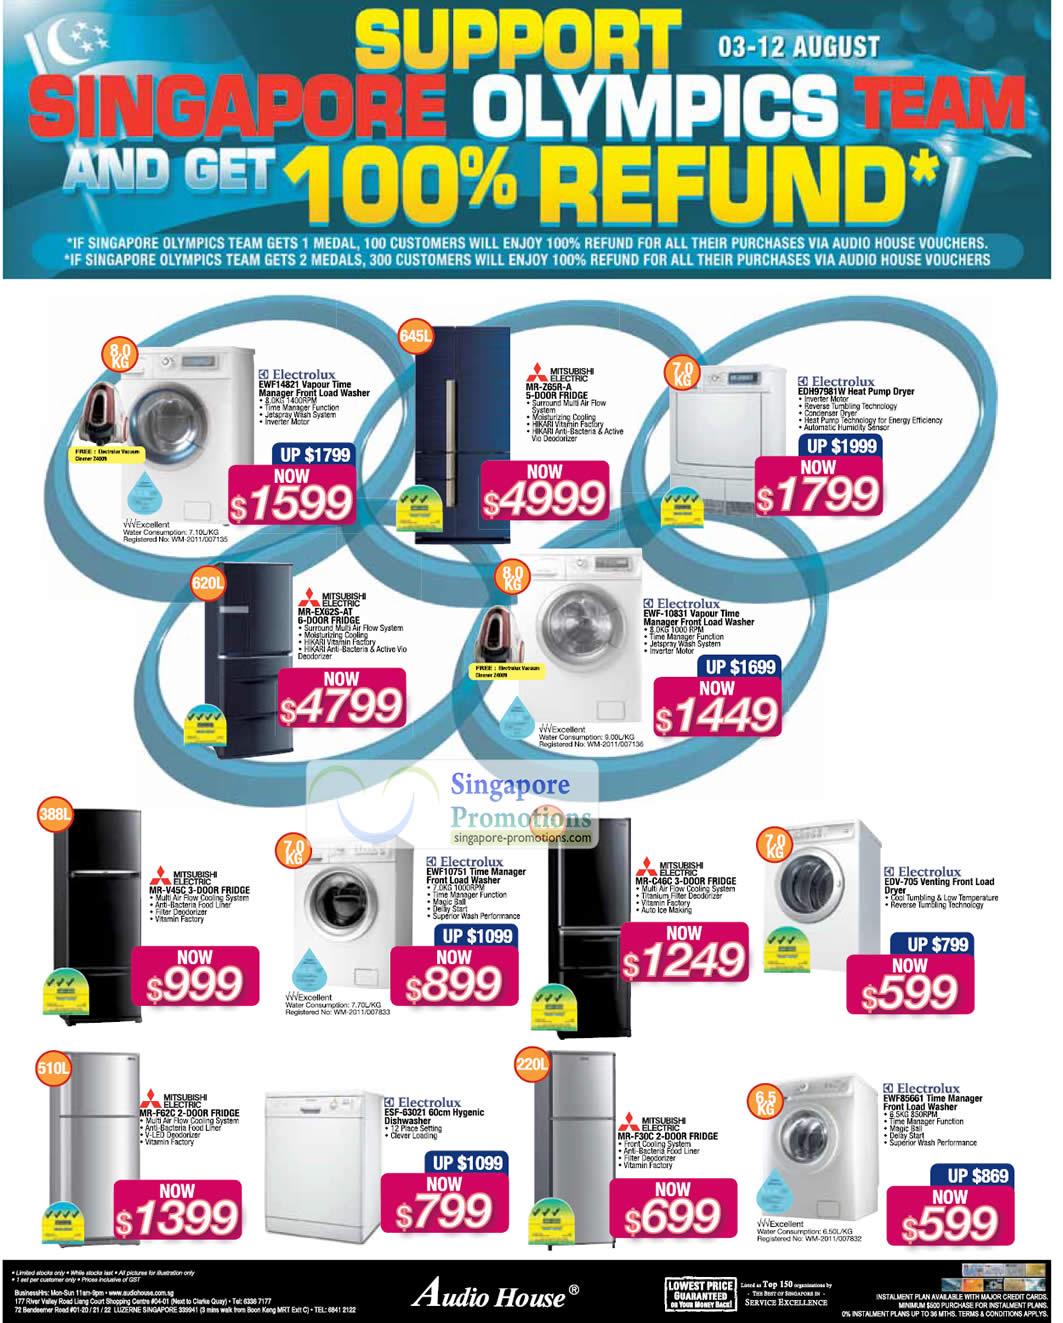 Featured image for Audio House Electronics, TV, Digital Cameras, Notebooks & Appliances Offers 3 - 12 Aug 2012